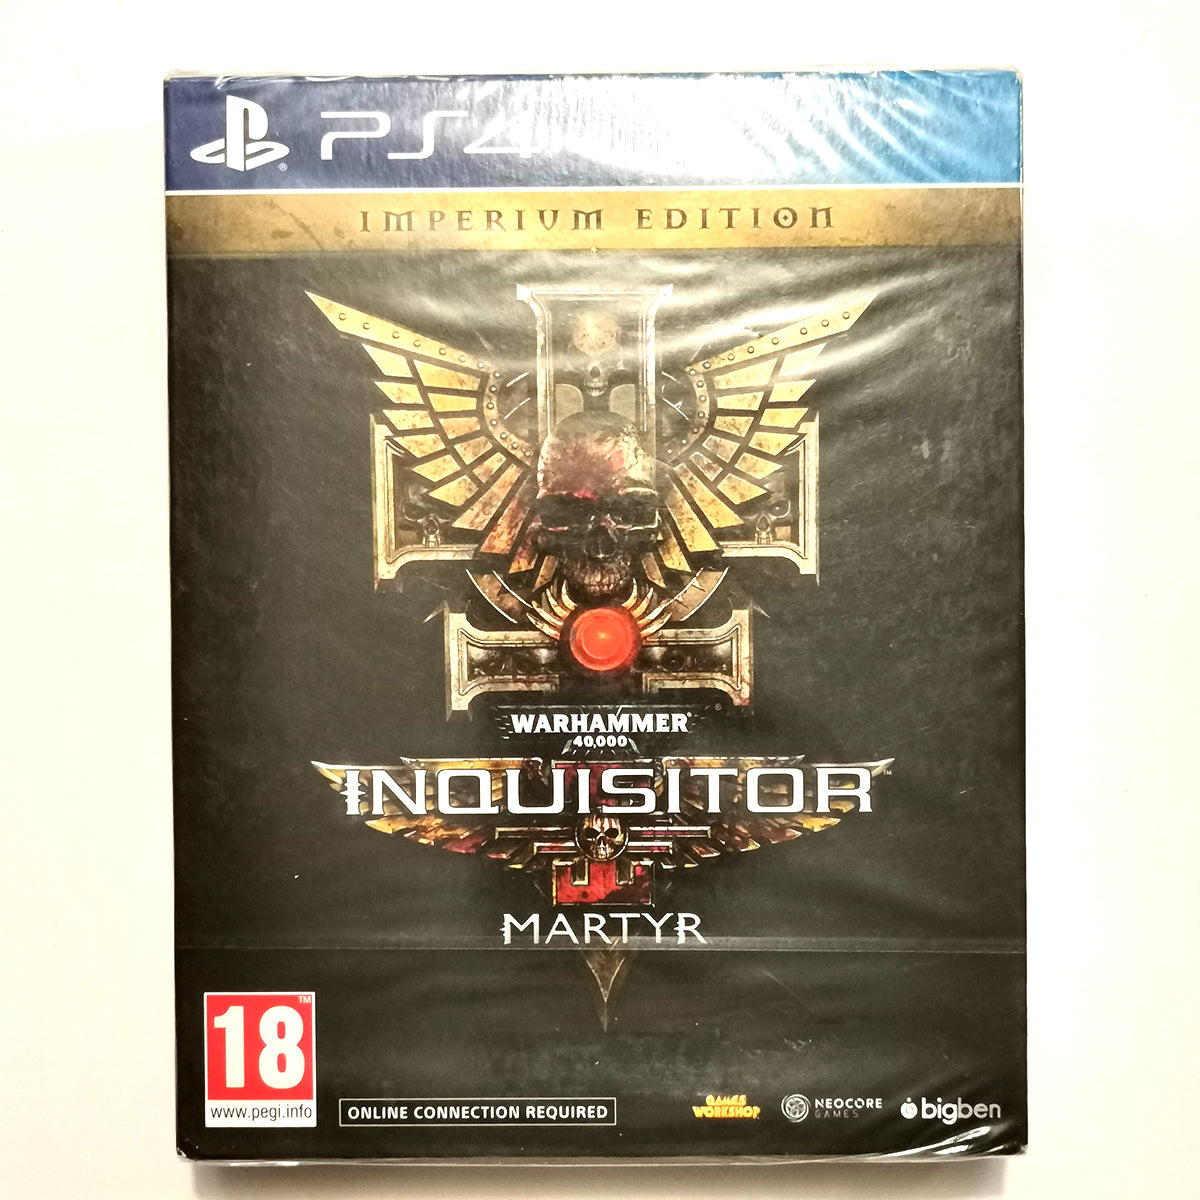 Warhammer 40000: Inquisitor - Martyr Imperium Edition (Factory Sealed)